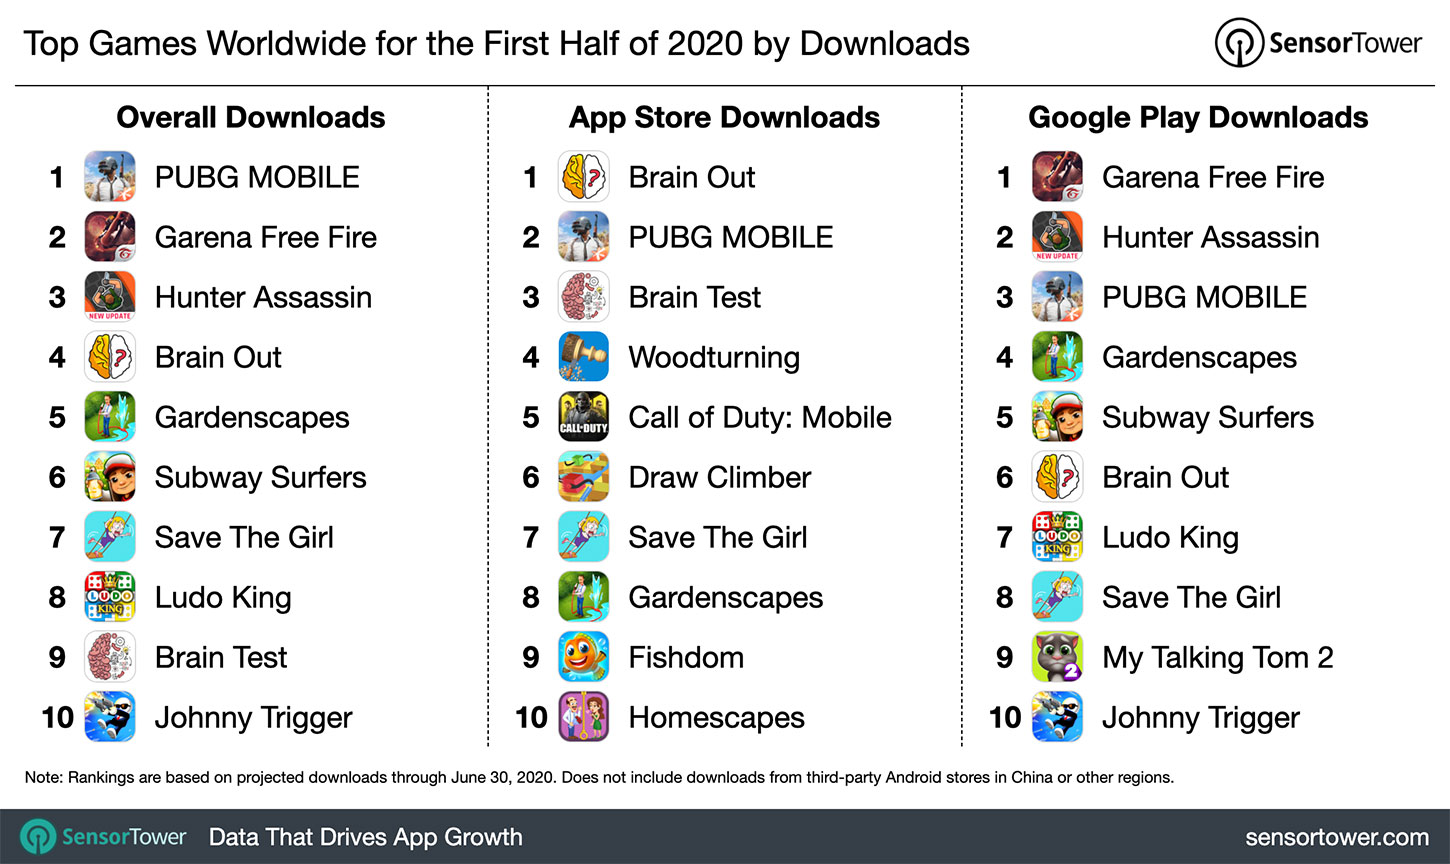 1H 2020 Most Downloaded Games Worldwide